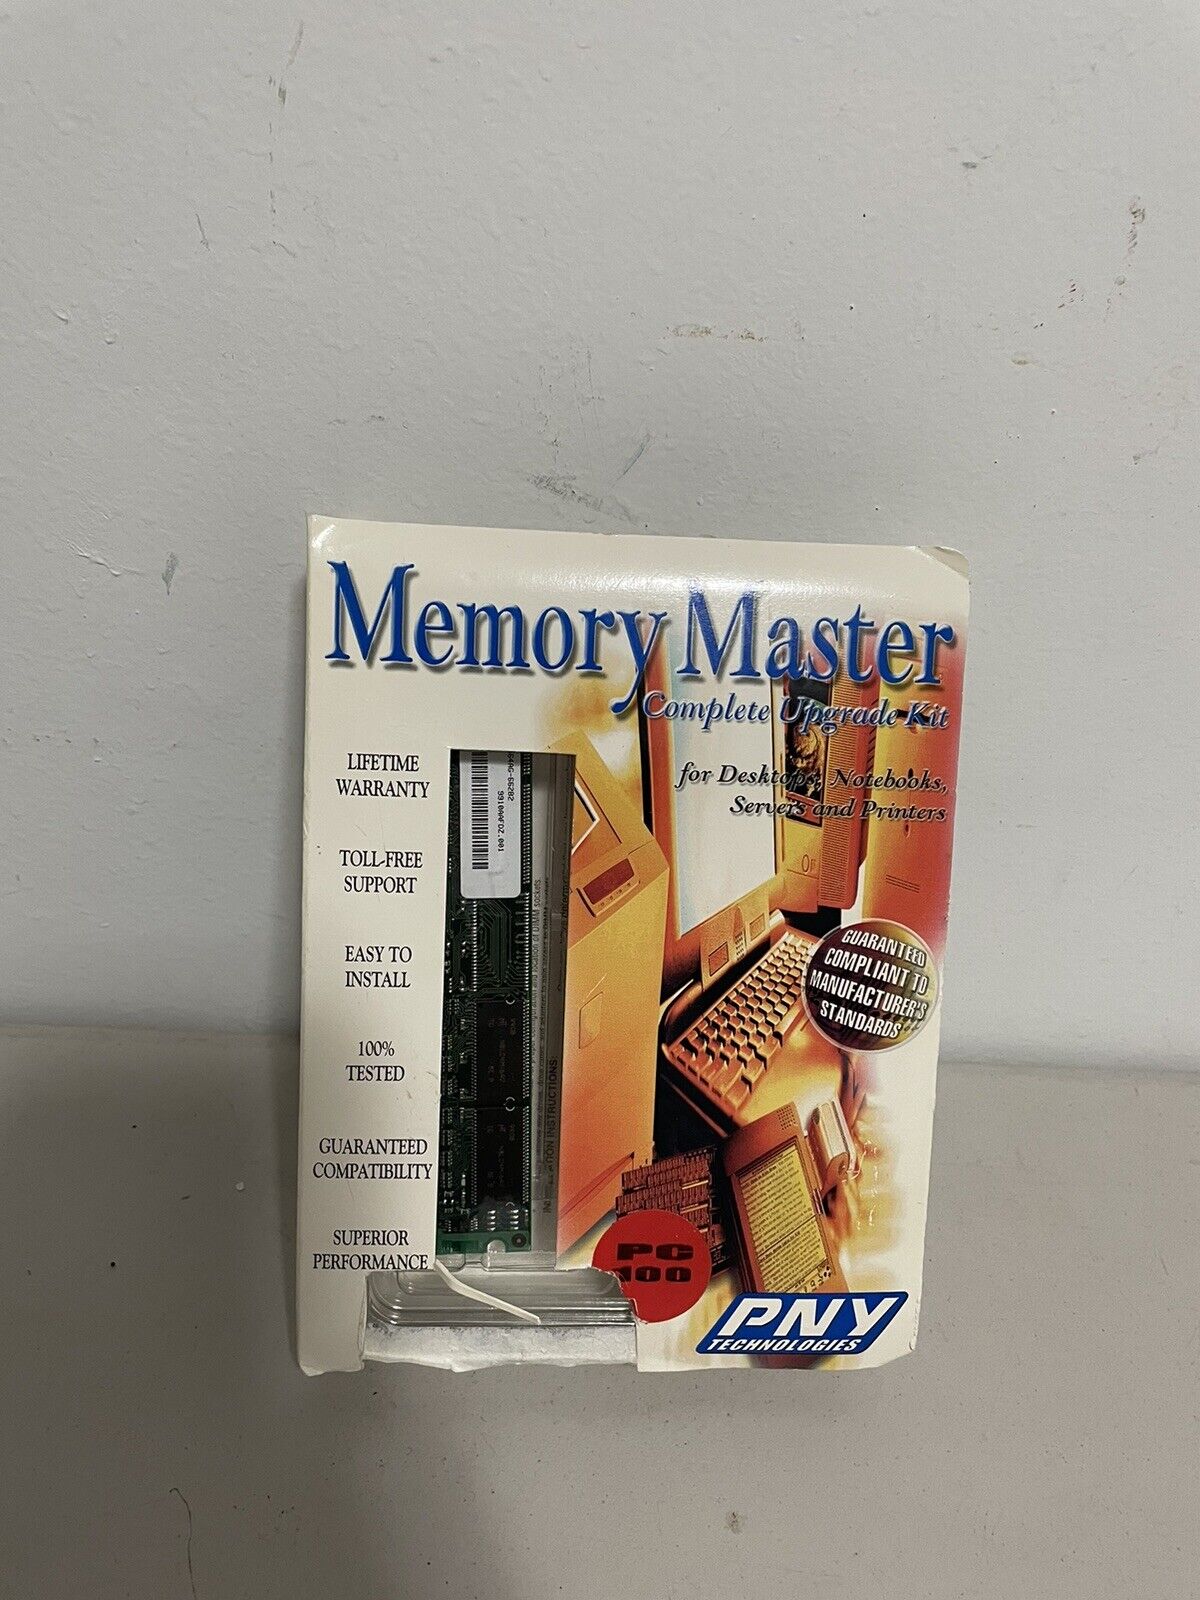 New Memory Master Complete Upgrade Kit  PNY Technologies Dimm 32mb Pc100 SDRAM